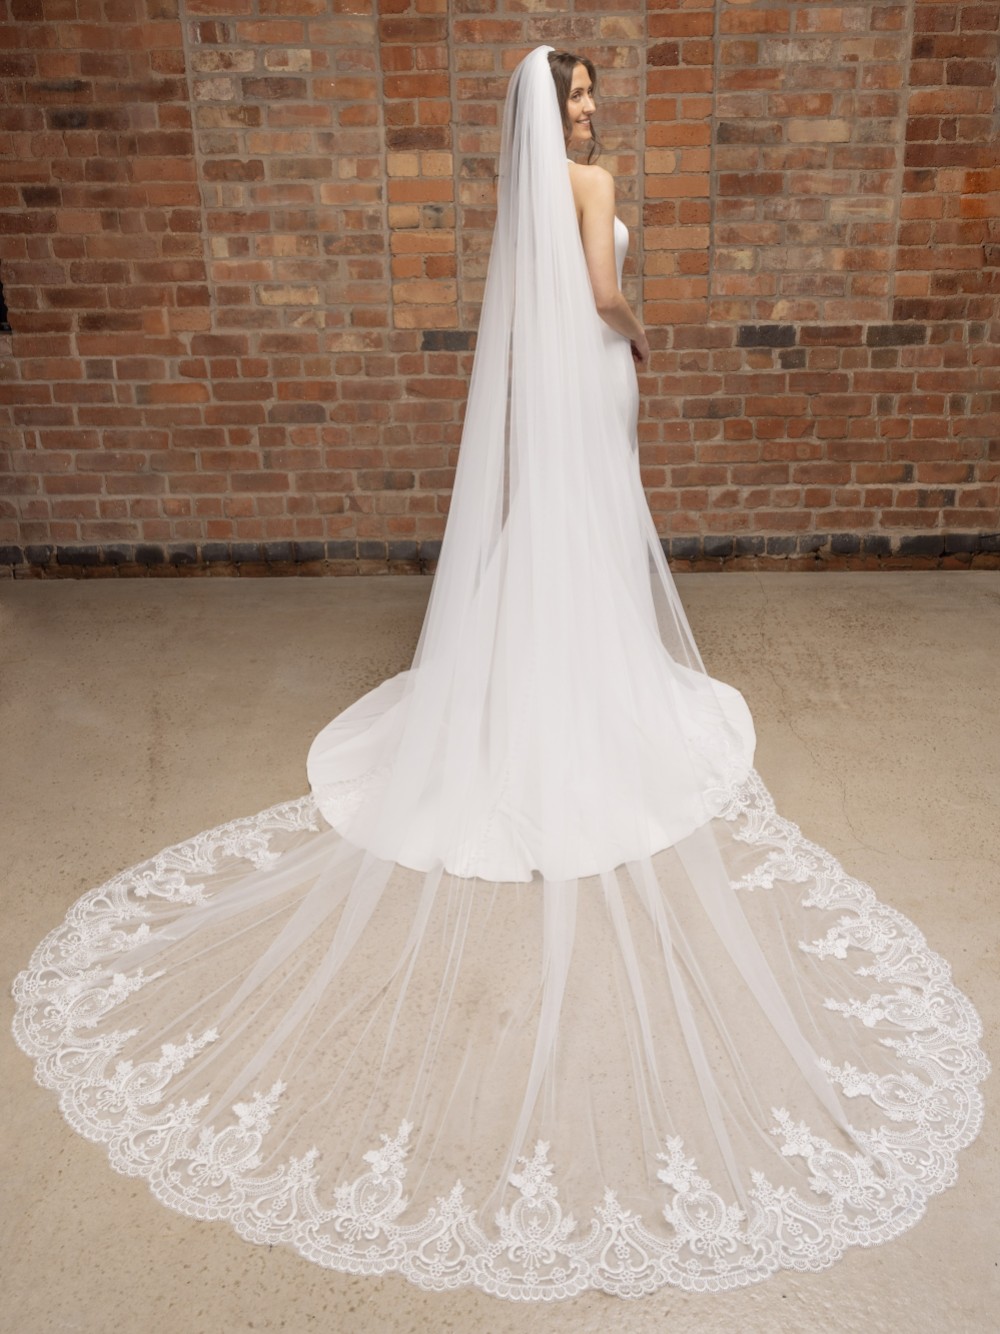 Photograph of Perfect Bridal Ivory Long Single Tier Veil with Lace Train